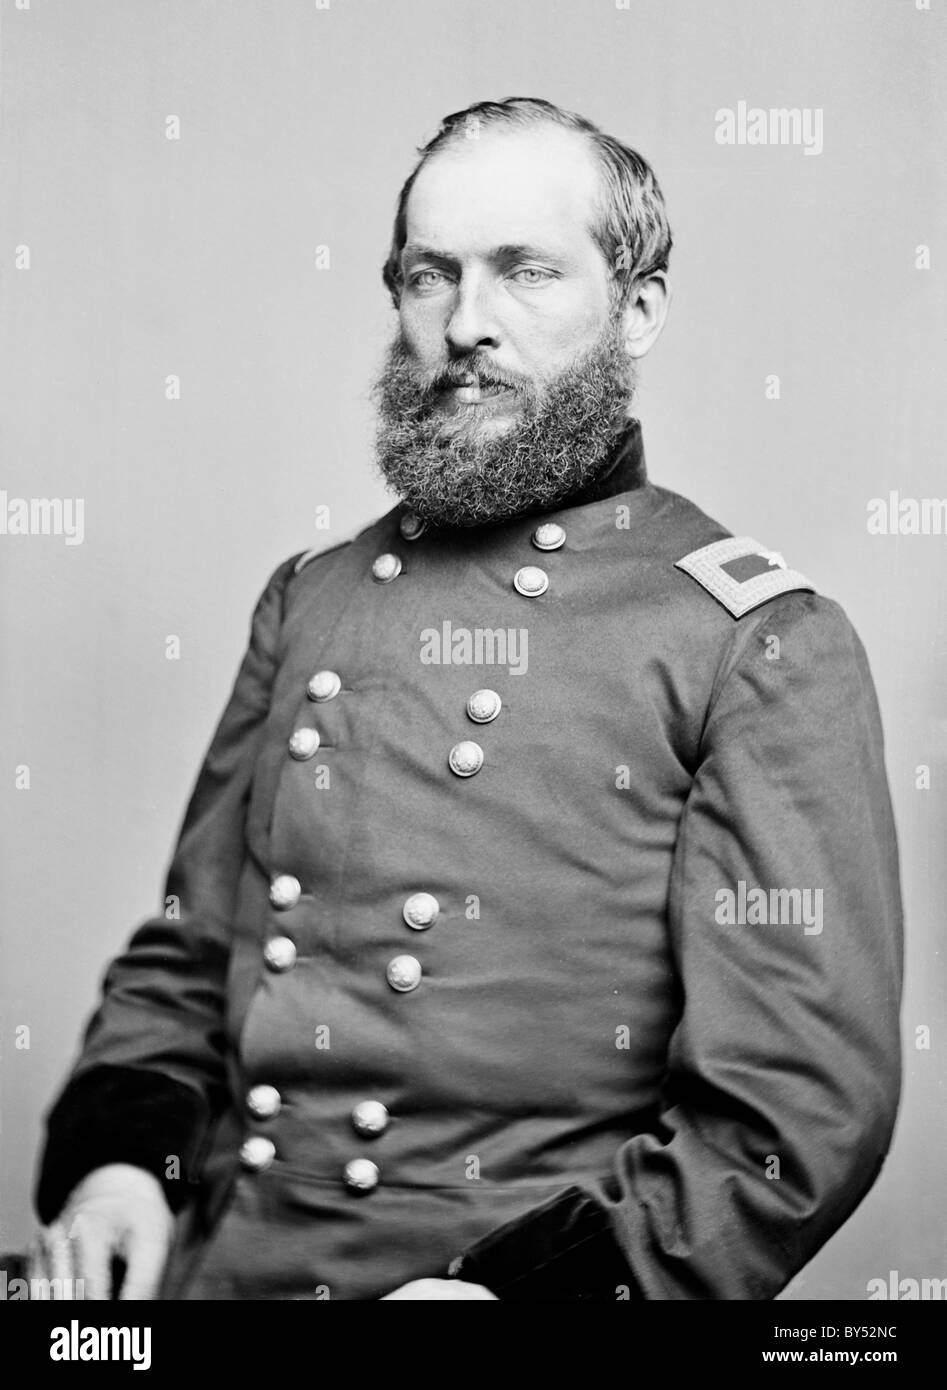 James A. Garfield, President James Abram Garfield was the 20th President of the United States. Stock Photo